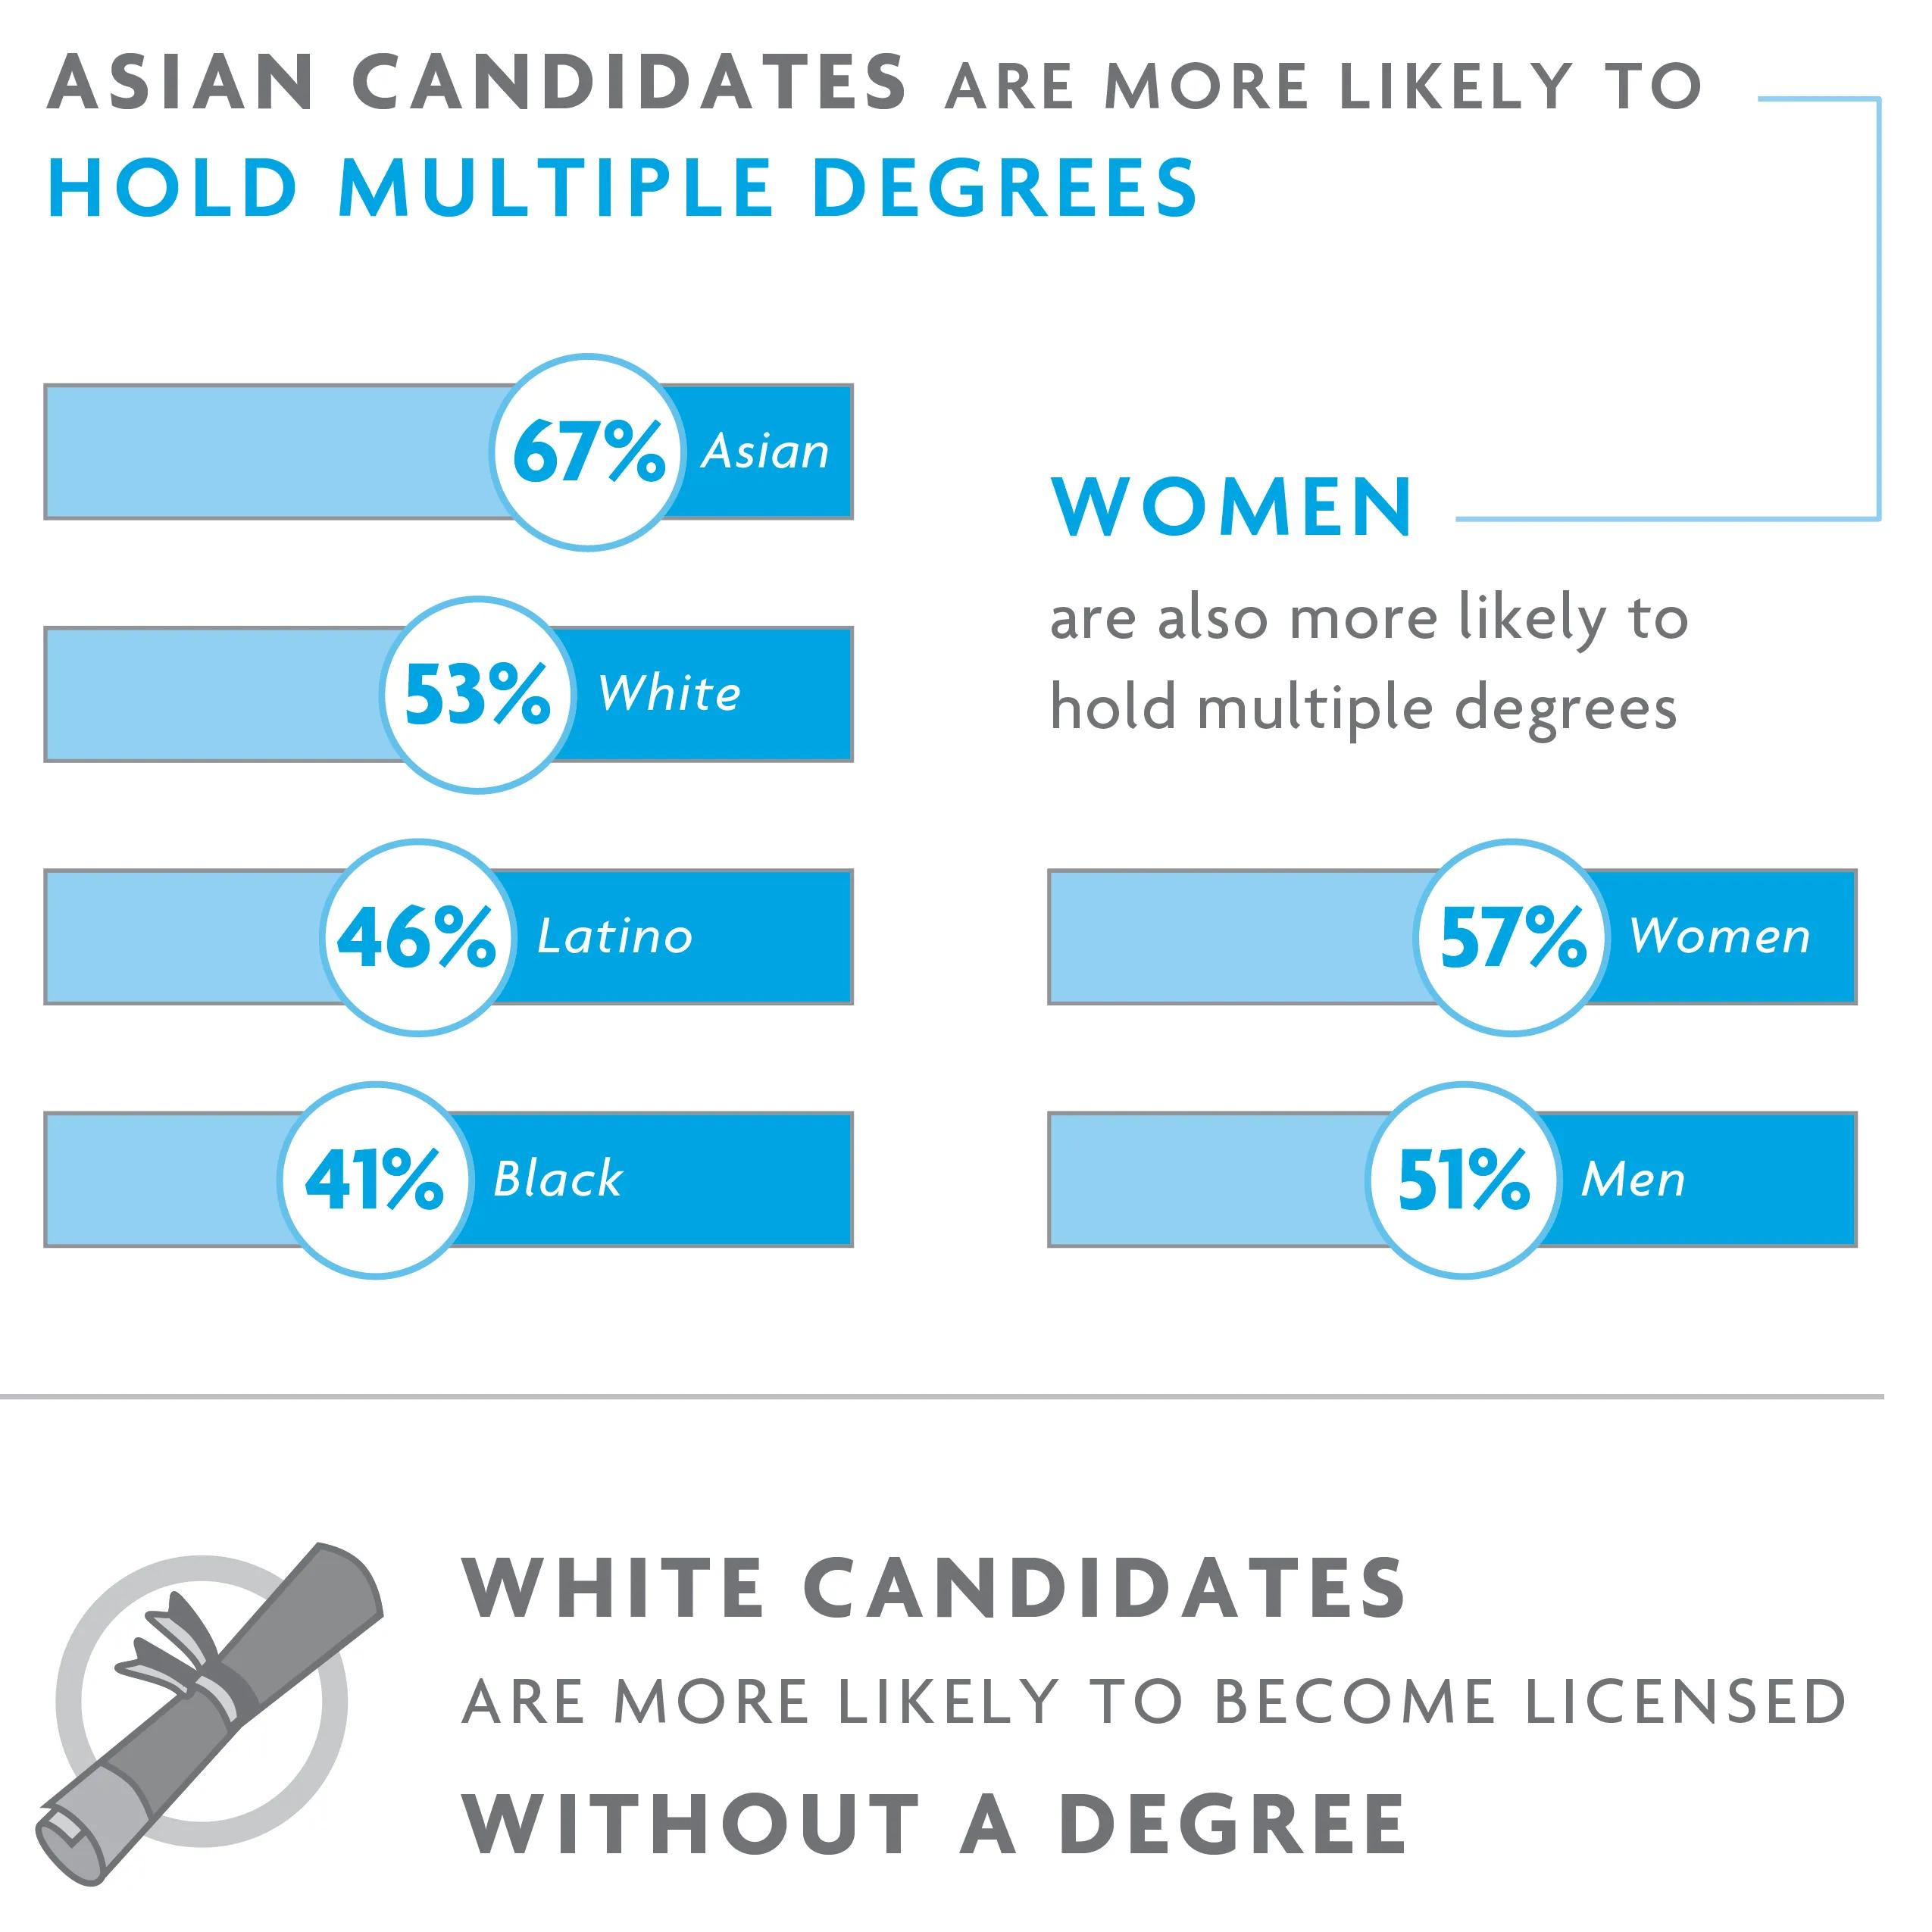 Asian candidates are more likely to hold multiple degrees, while white candidates are more likely to get licensed without a degree. For help with data accessibility, contact communications@ncarb.org.